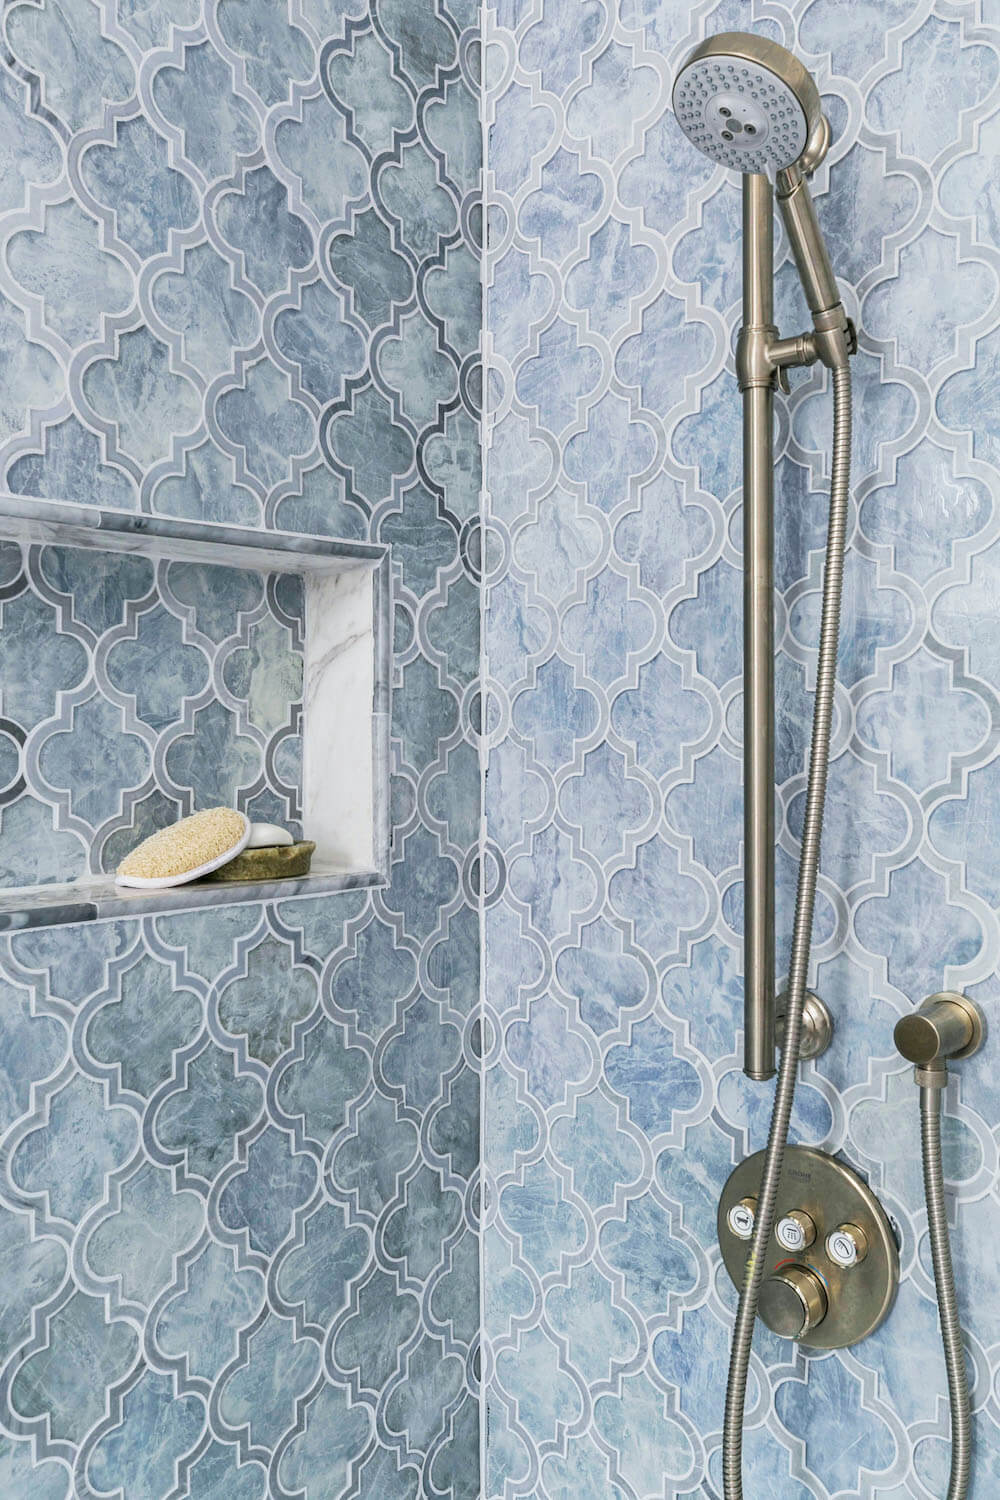 Shower with irregularly shaped blue tiles